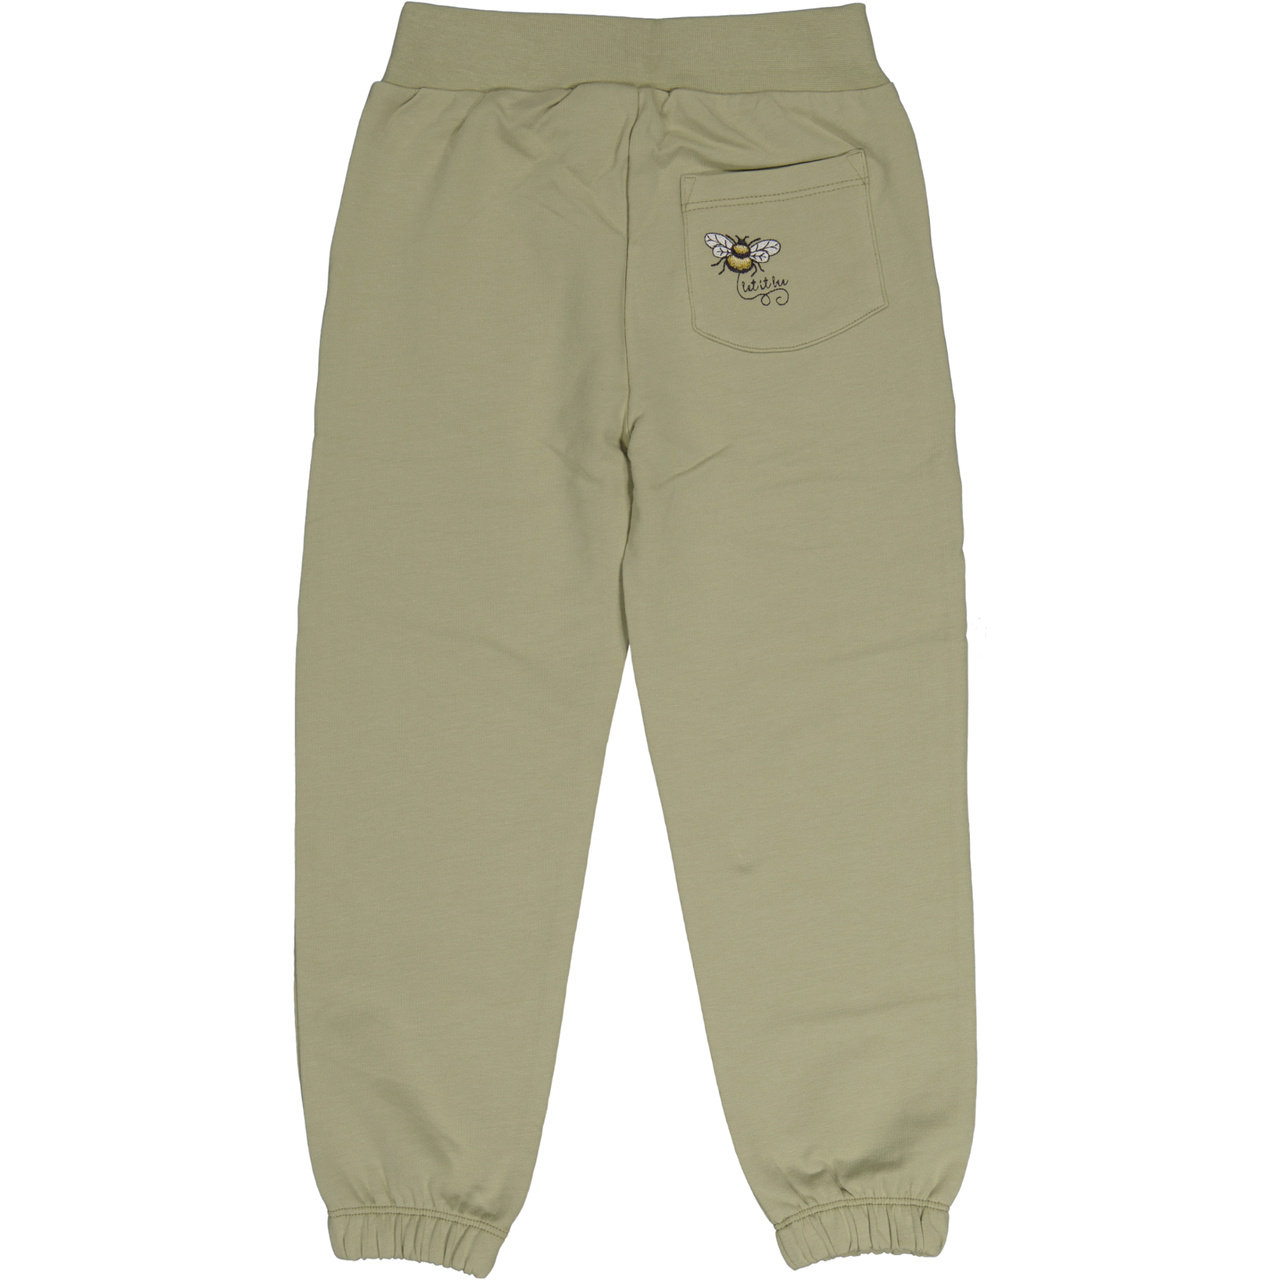 College trousers Olive 86/92